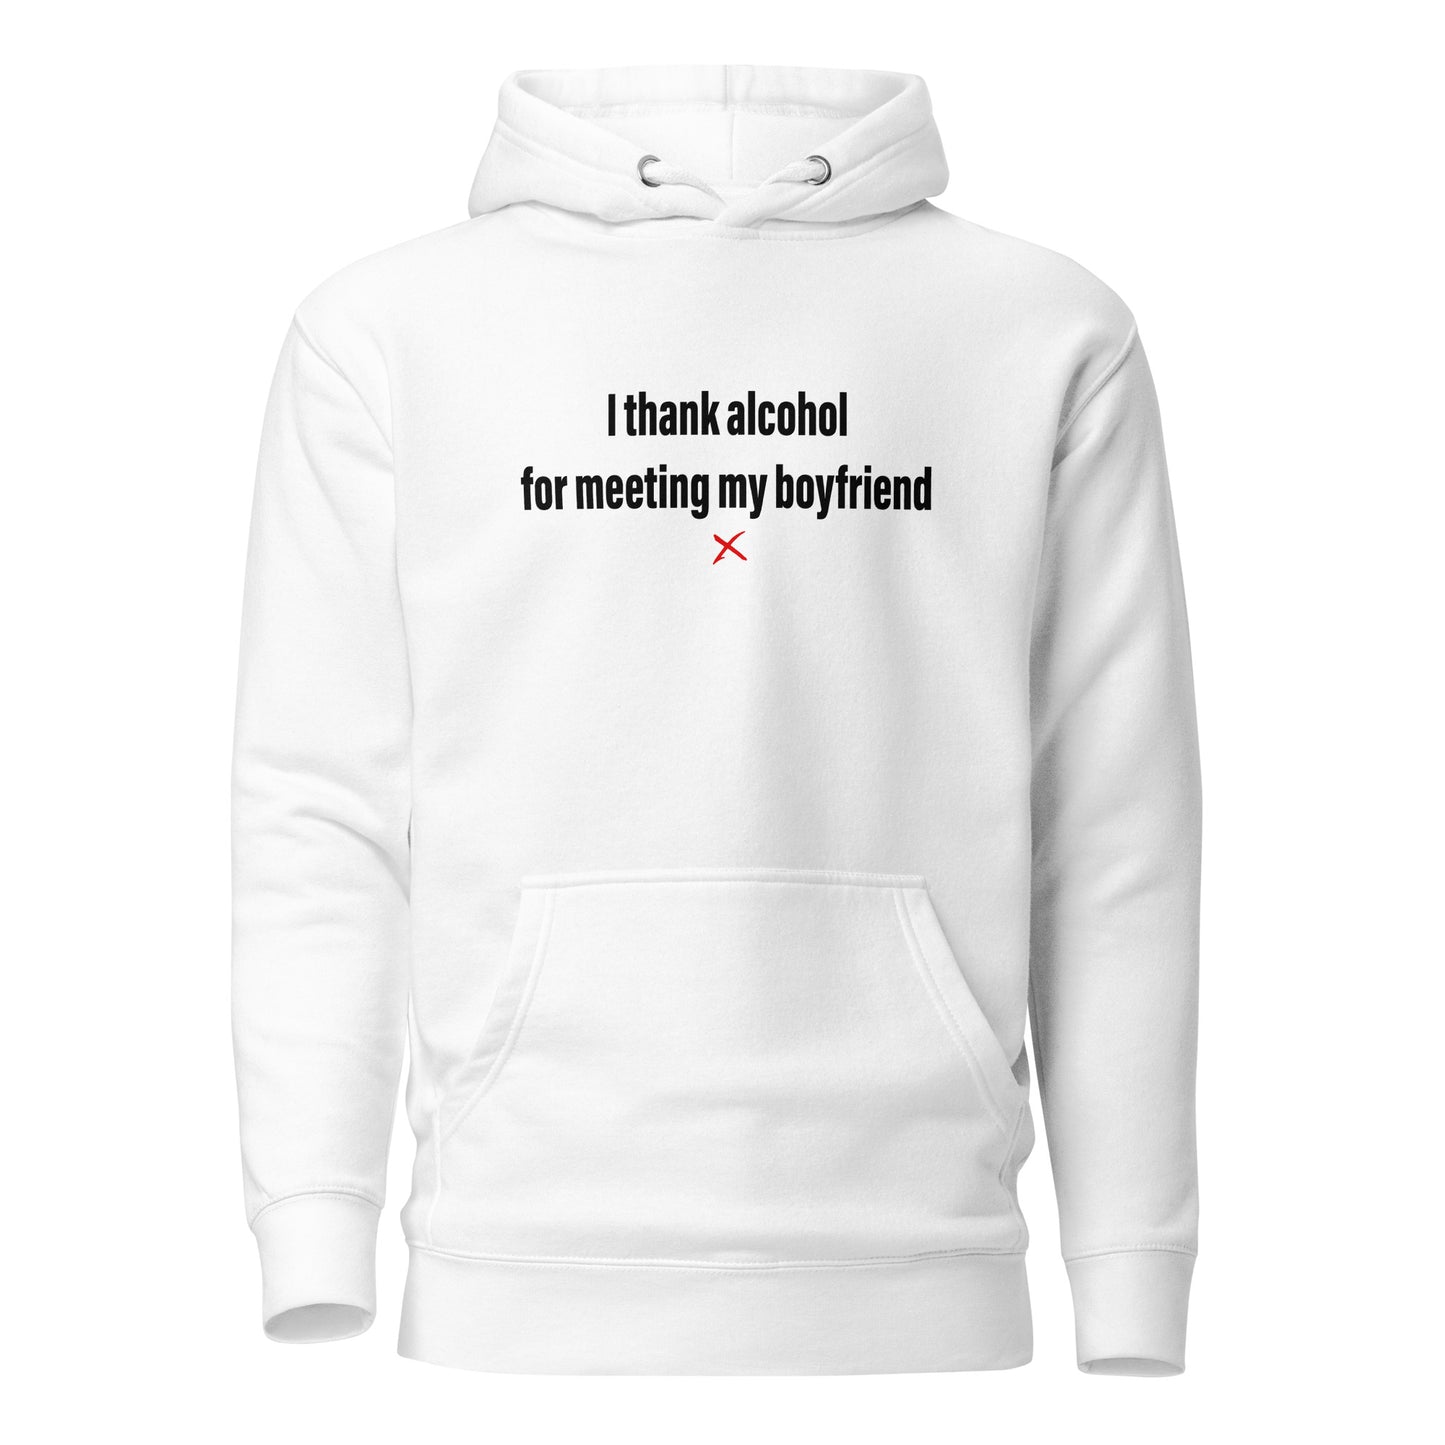 I thank alcohol for meeting my boyfriend - Hoodie